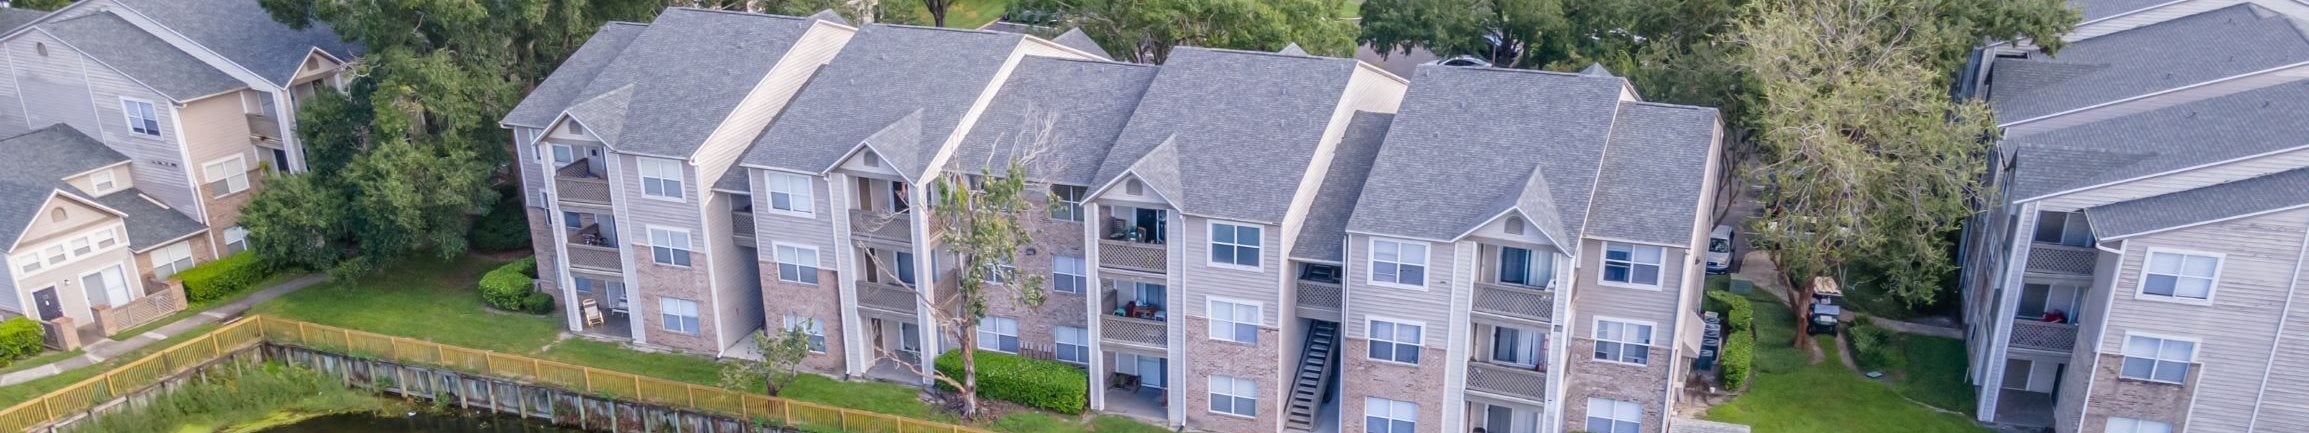 Aerial Views of Barber Park Apartments in Orlando FL